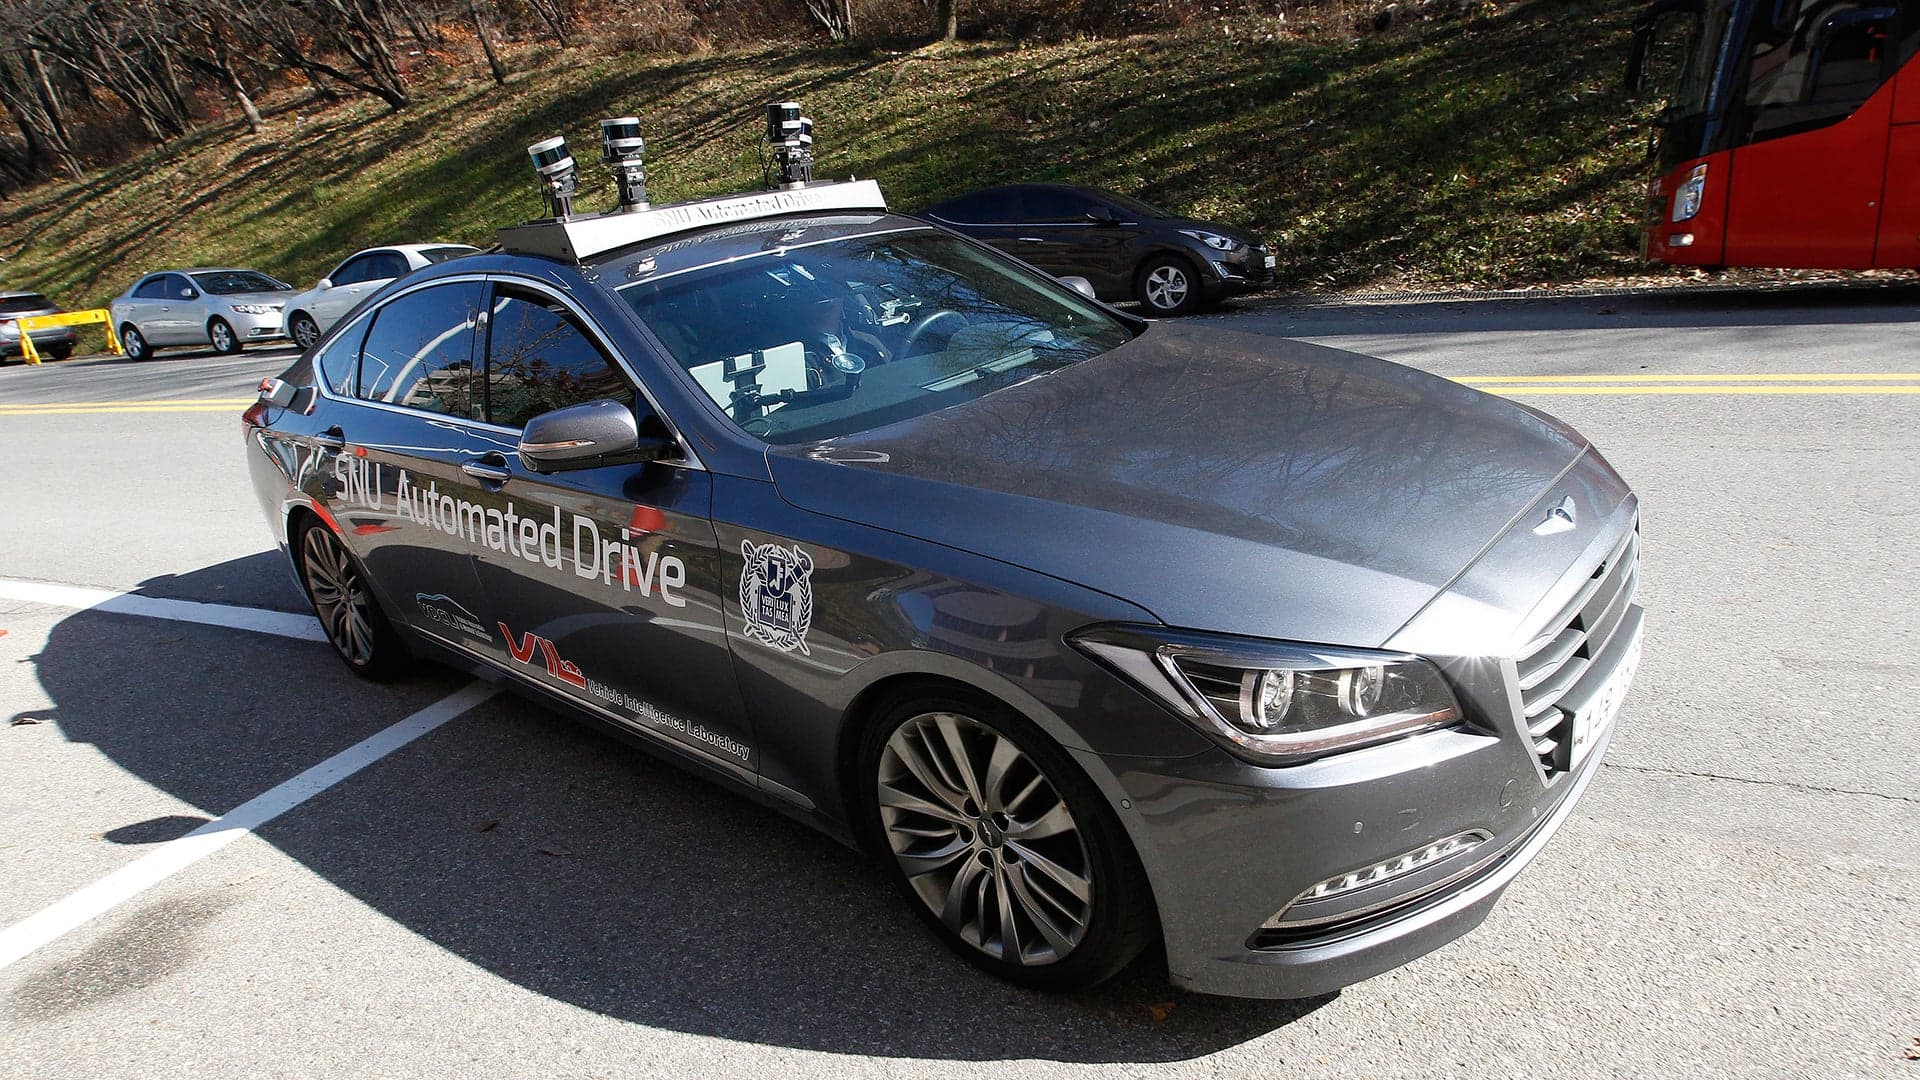 South Korea Building an Entire Town for Testing Self-Driving Cars